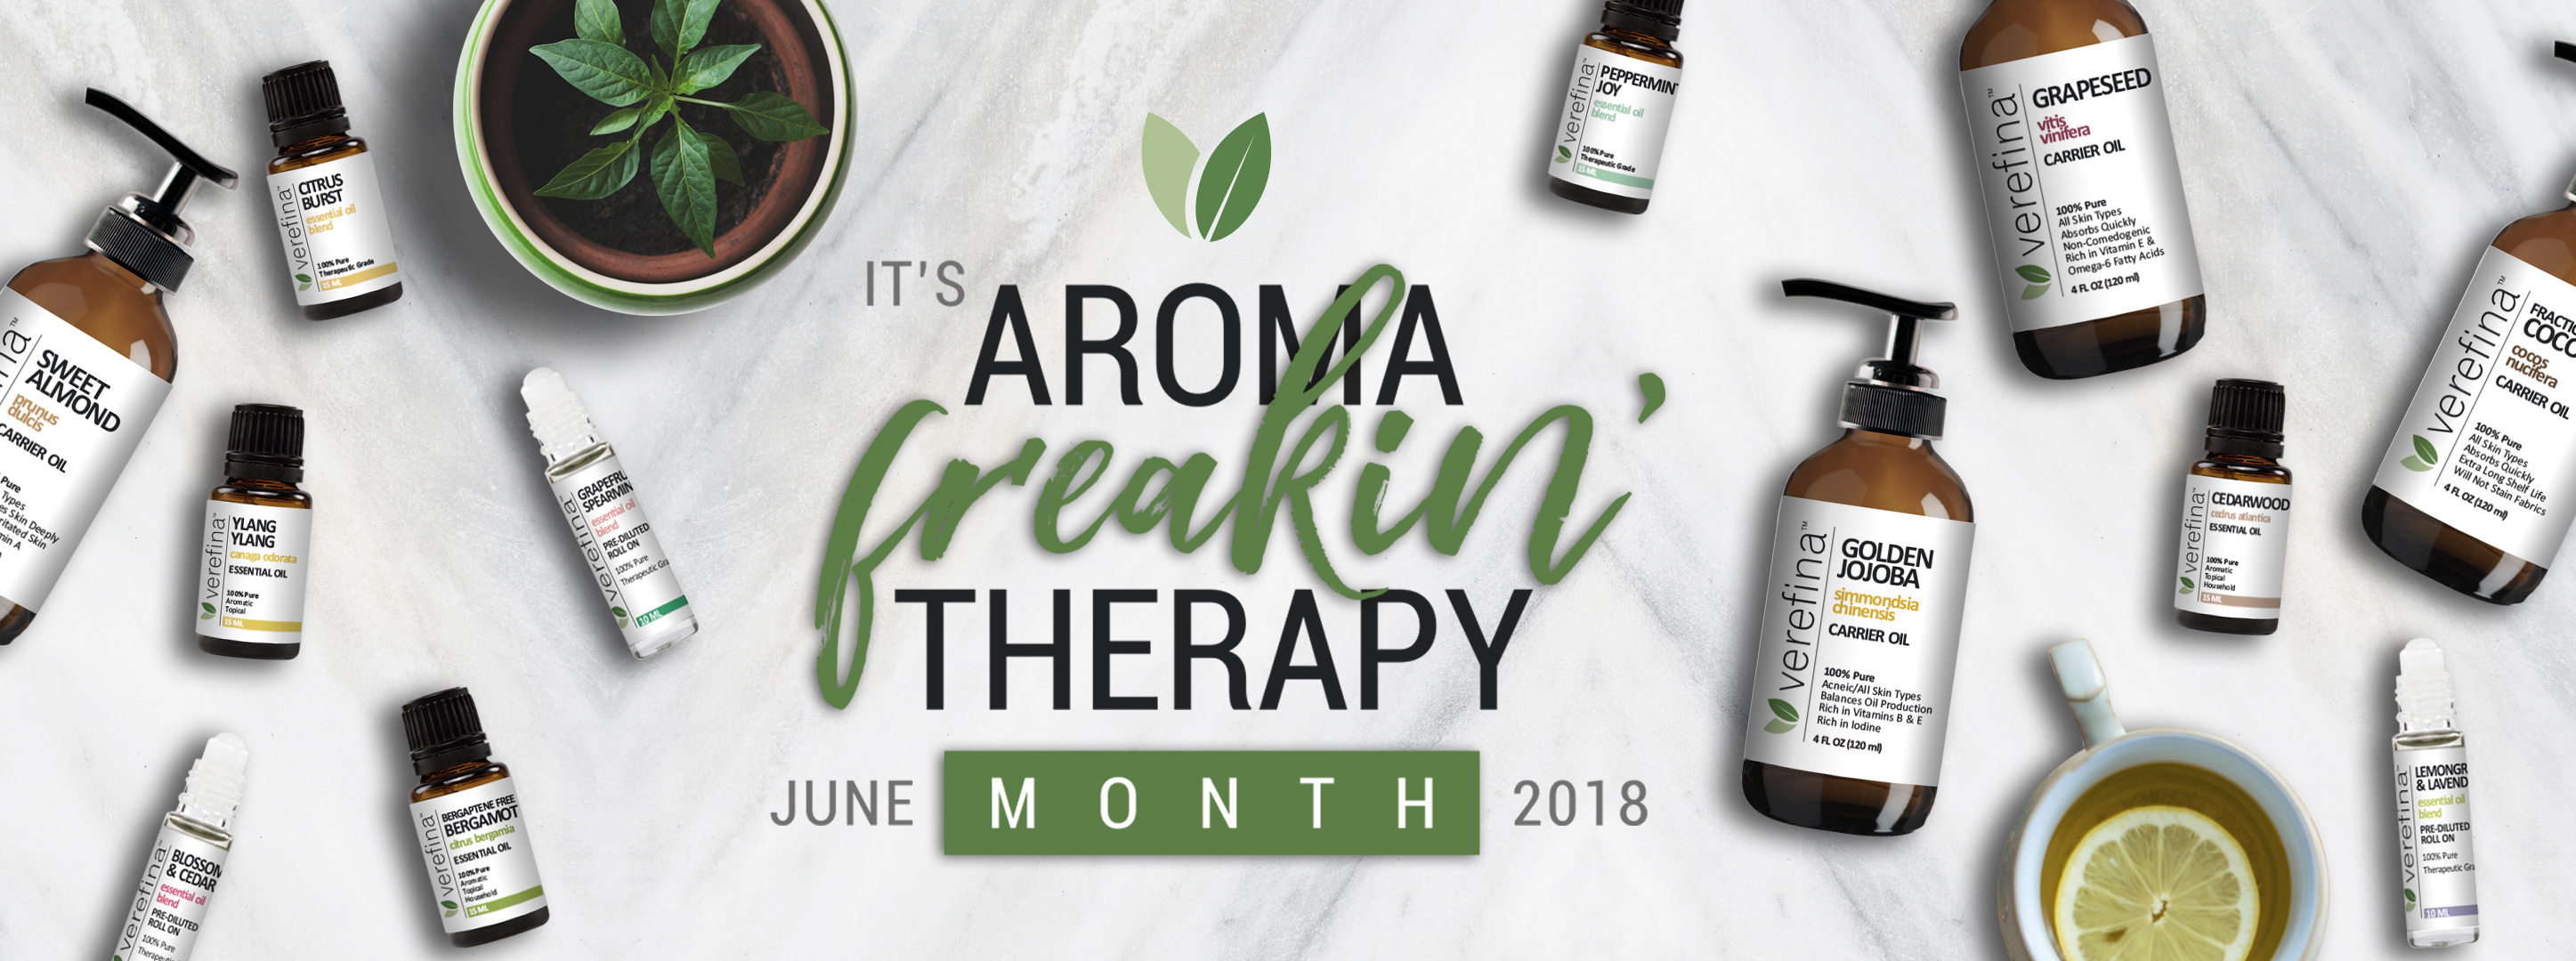 Aroma Freakin' Therapy Month